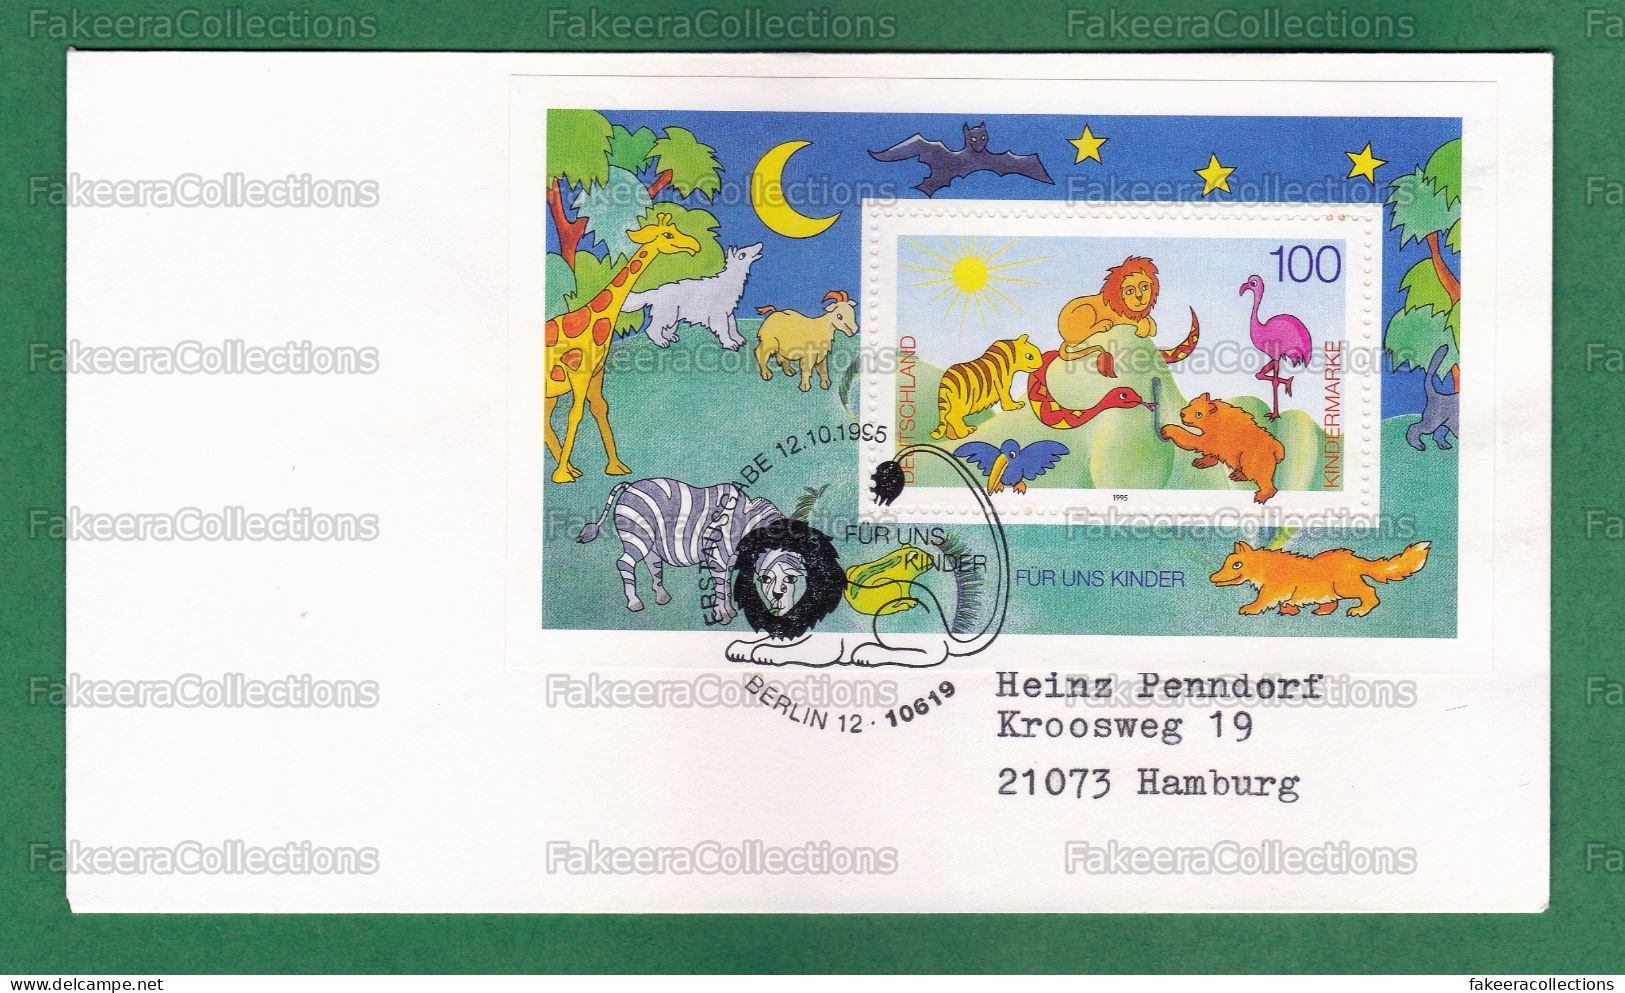 GERMANY 1995 - FOR THE CHILDREN 1v M/S FDC - Postal Used On Date Of Issue - Animals, TIGER, LION, SNAKE, BEAR, BIRDS - Félins